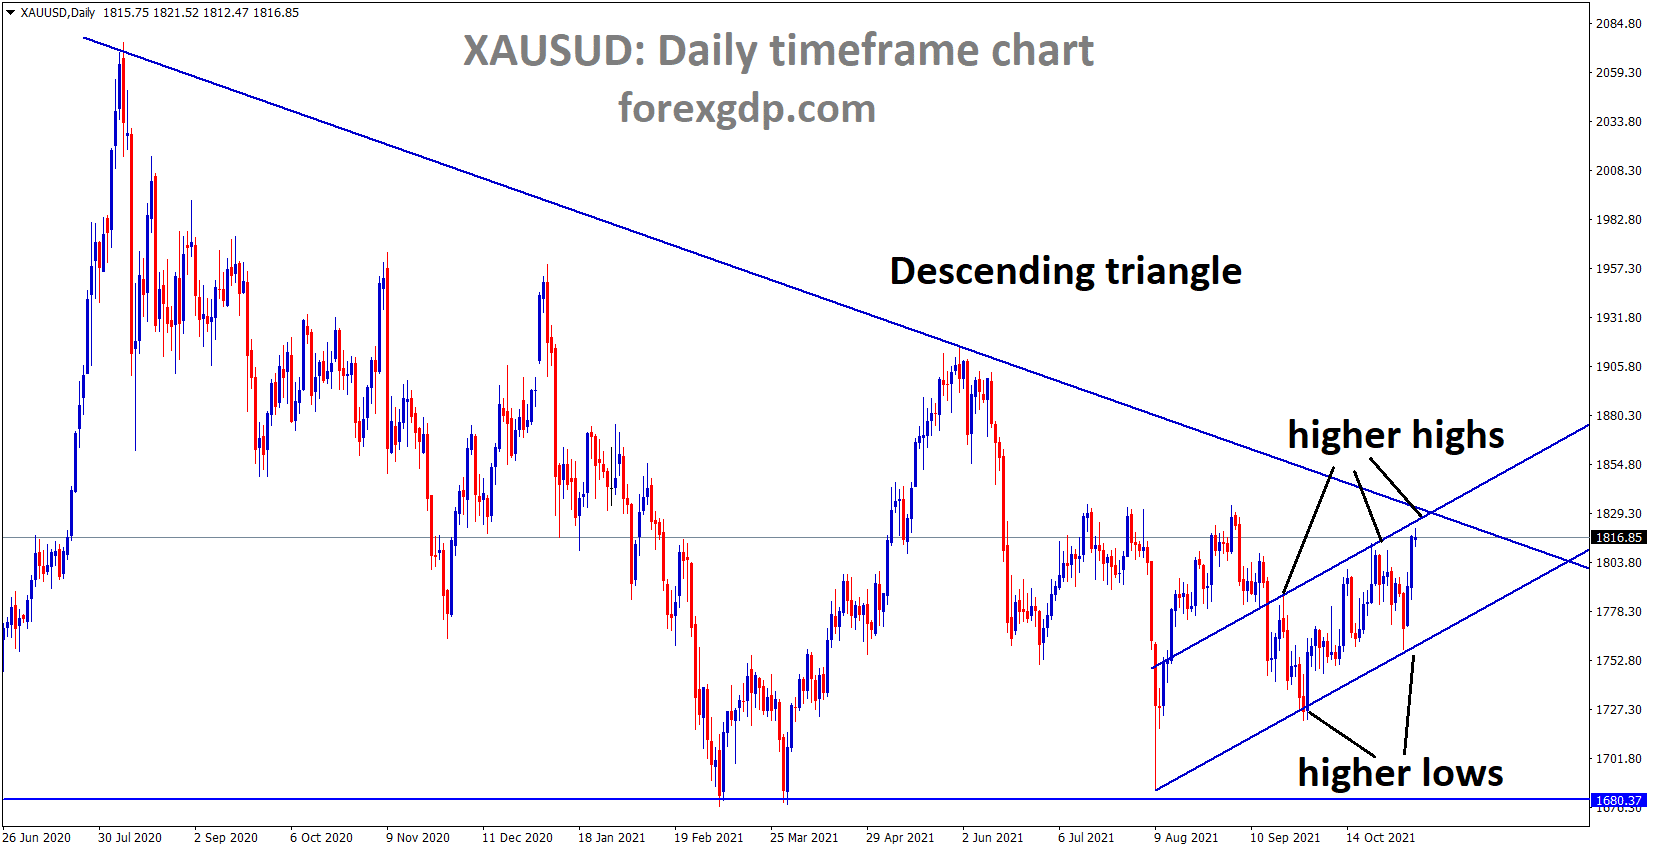 XAUUSD Gold price is moving in the Descending triangle pattern and the market price is standing at the higher high